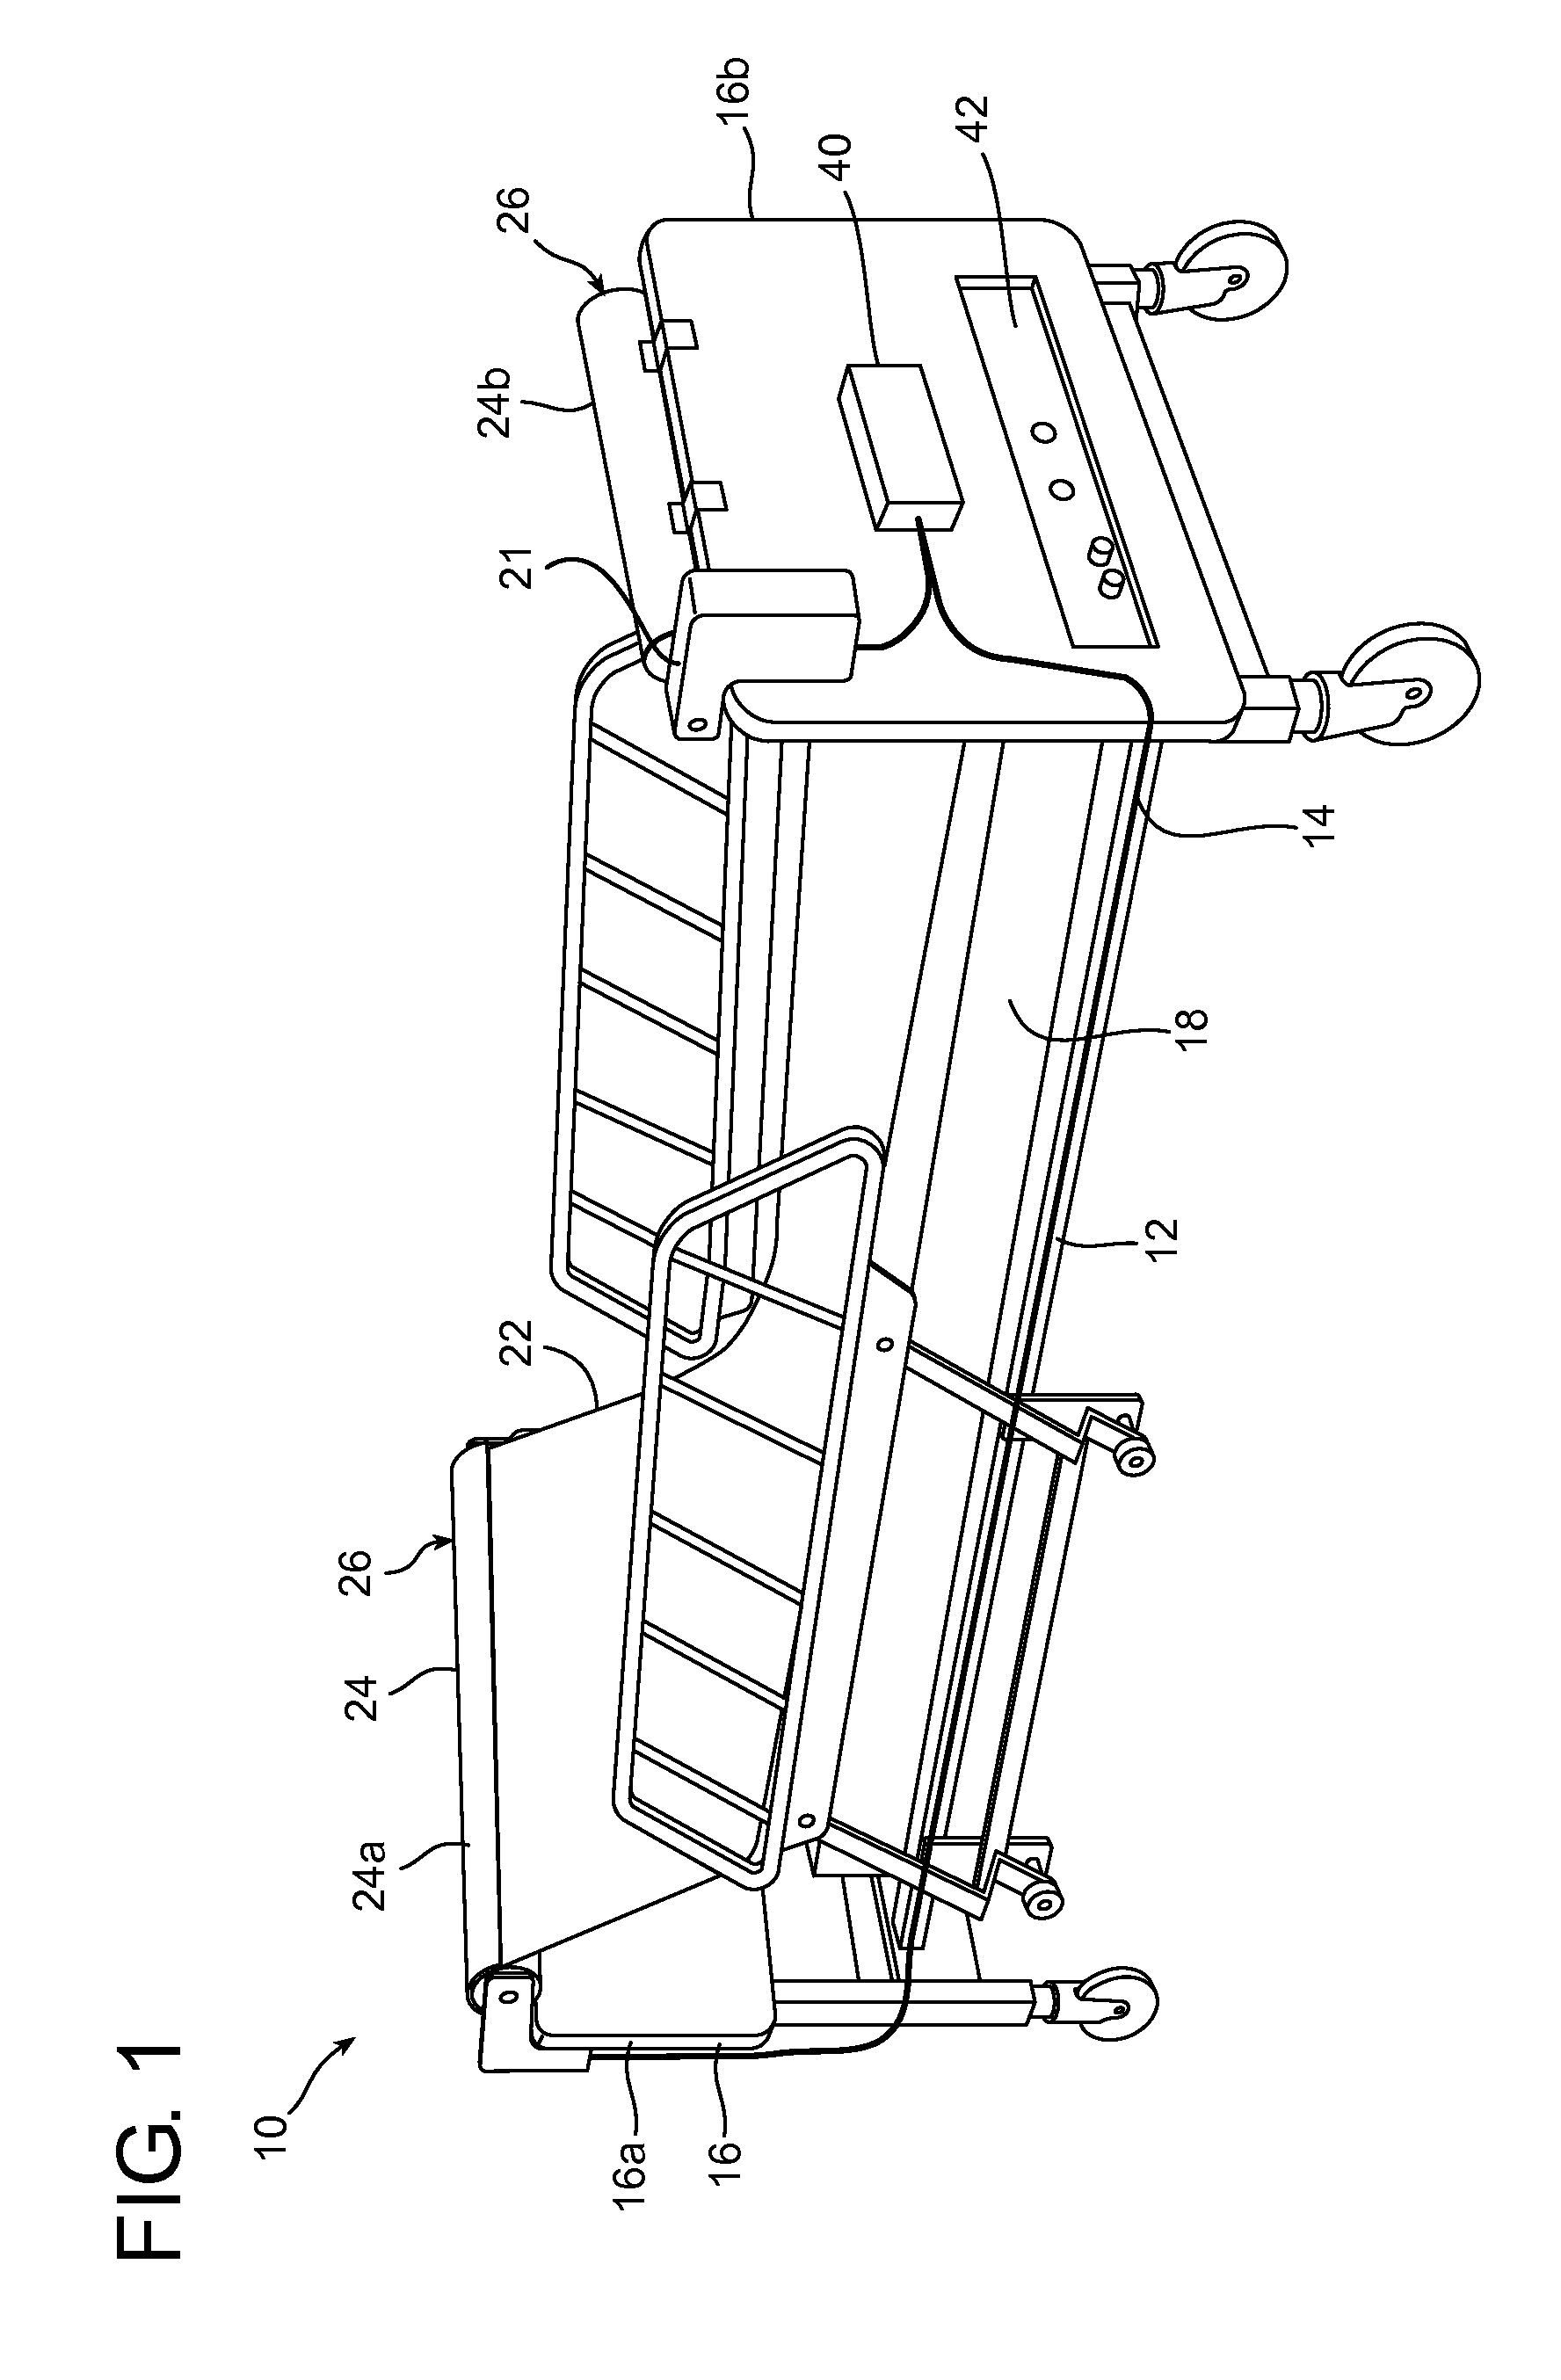 Support apparatus for preventing and/or inhibiting decubitus ulcers